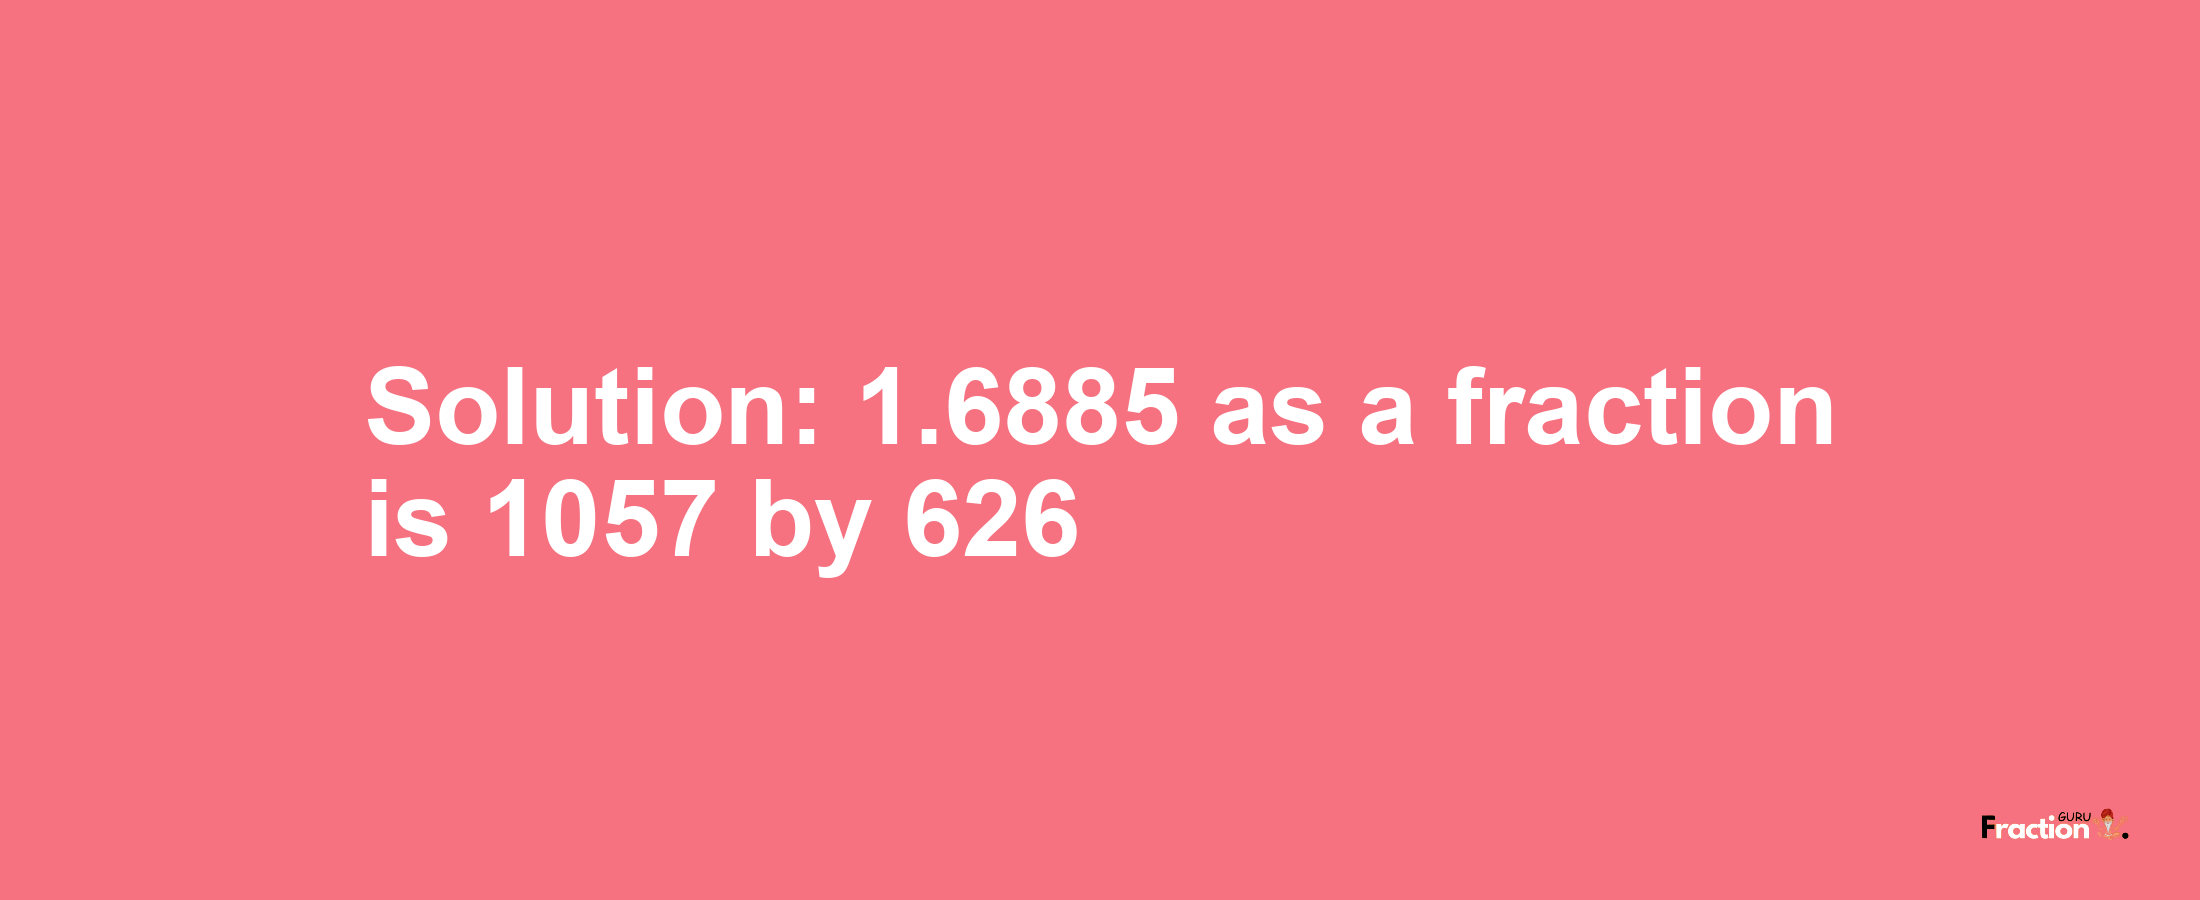 Solution:1.6885 as a fraction is 1057/626